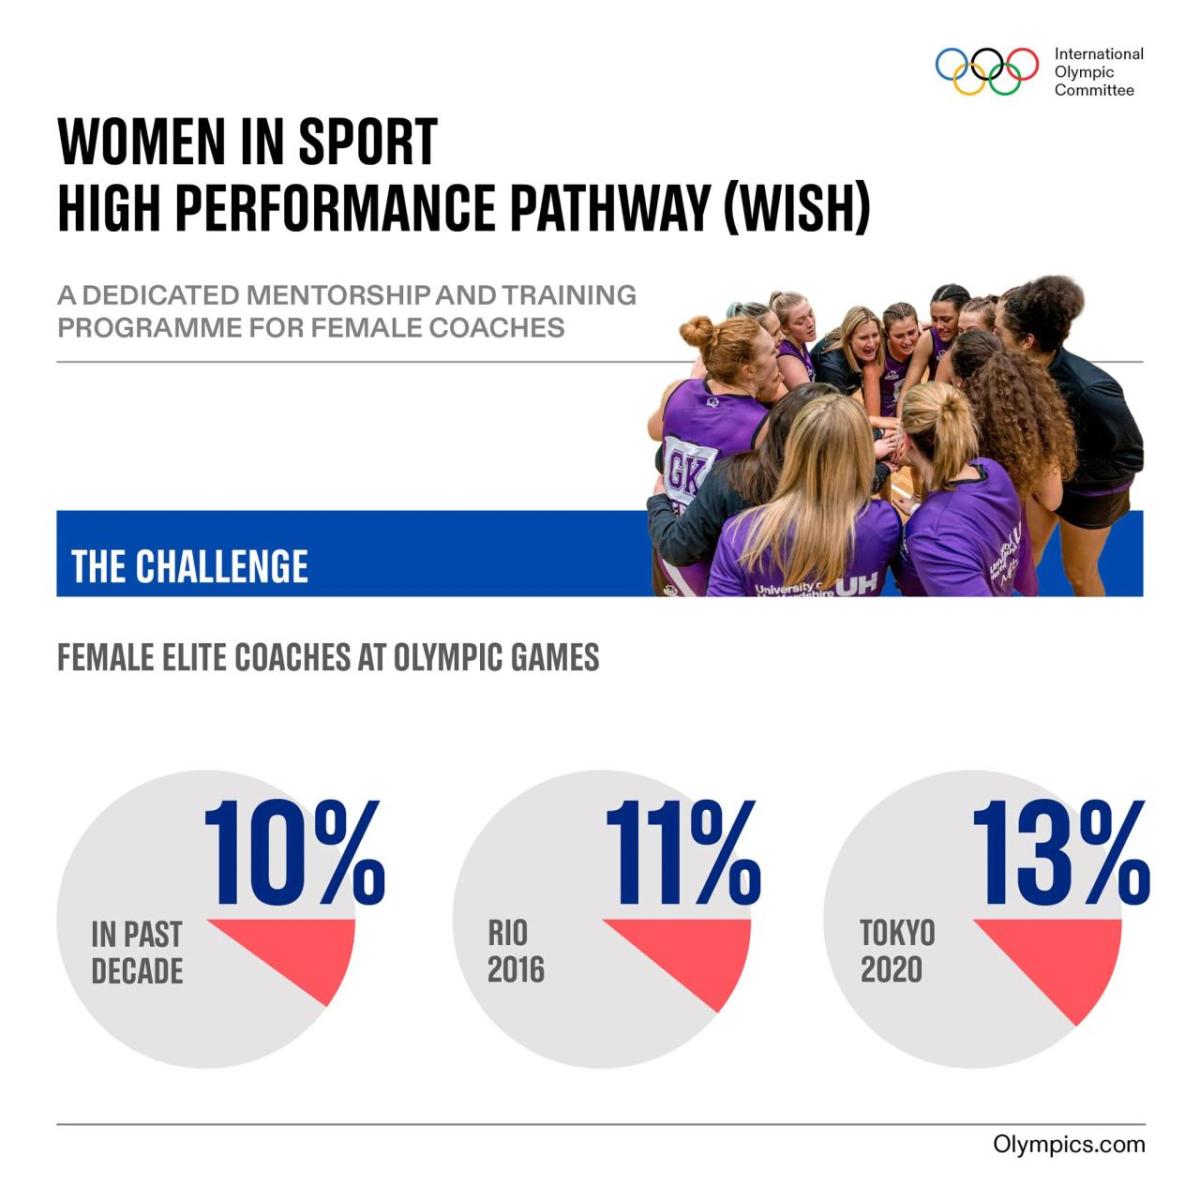 Info graphic: "Women in Sport High Performance Pathway (WISH) with three pie chart statistics for female elite coaches at olympic games.